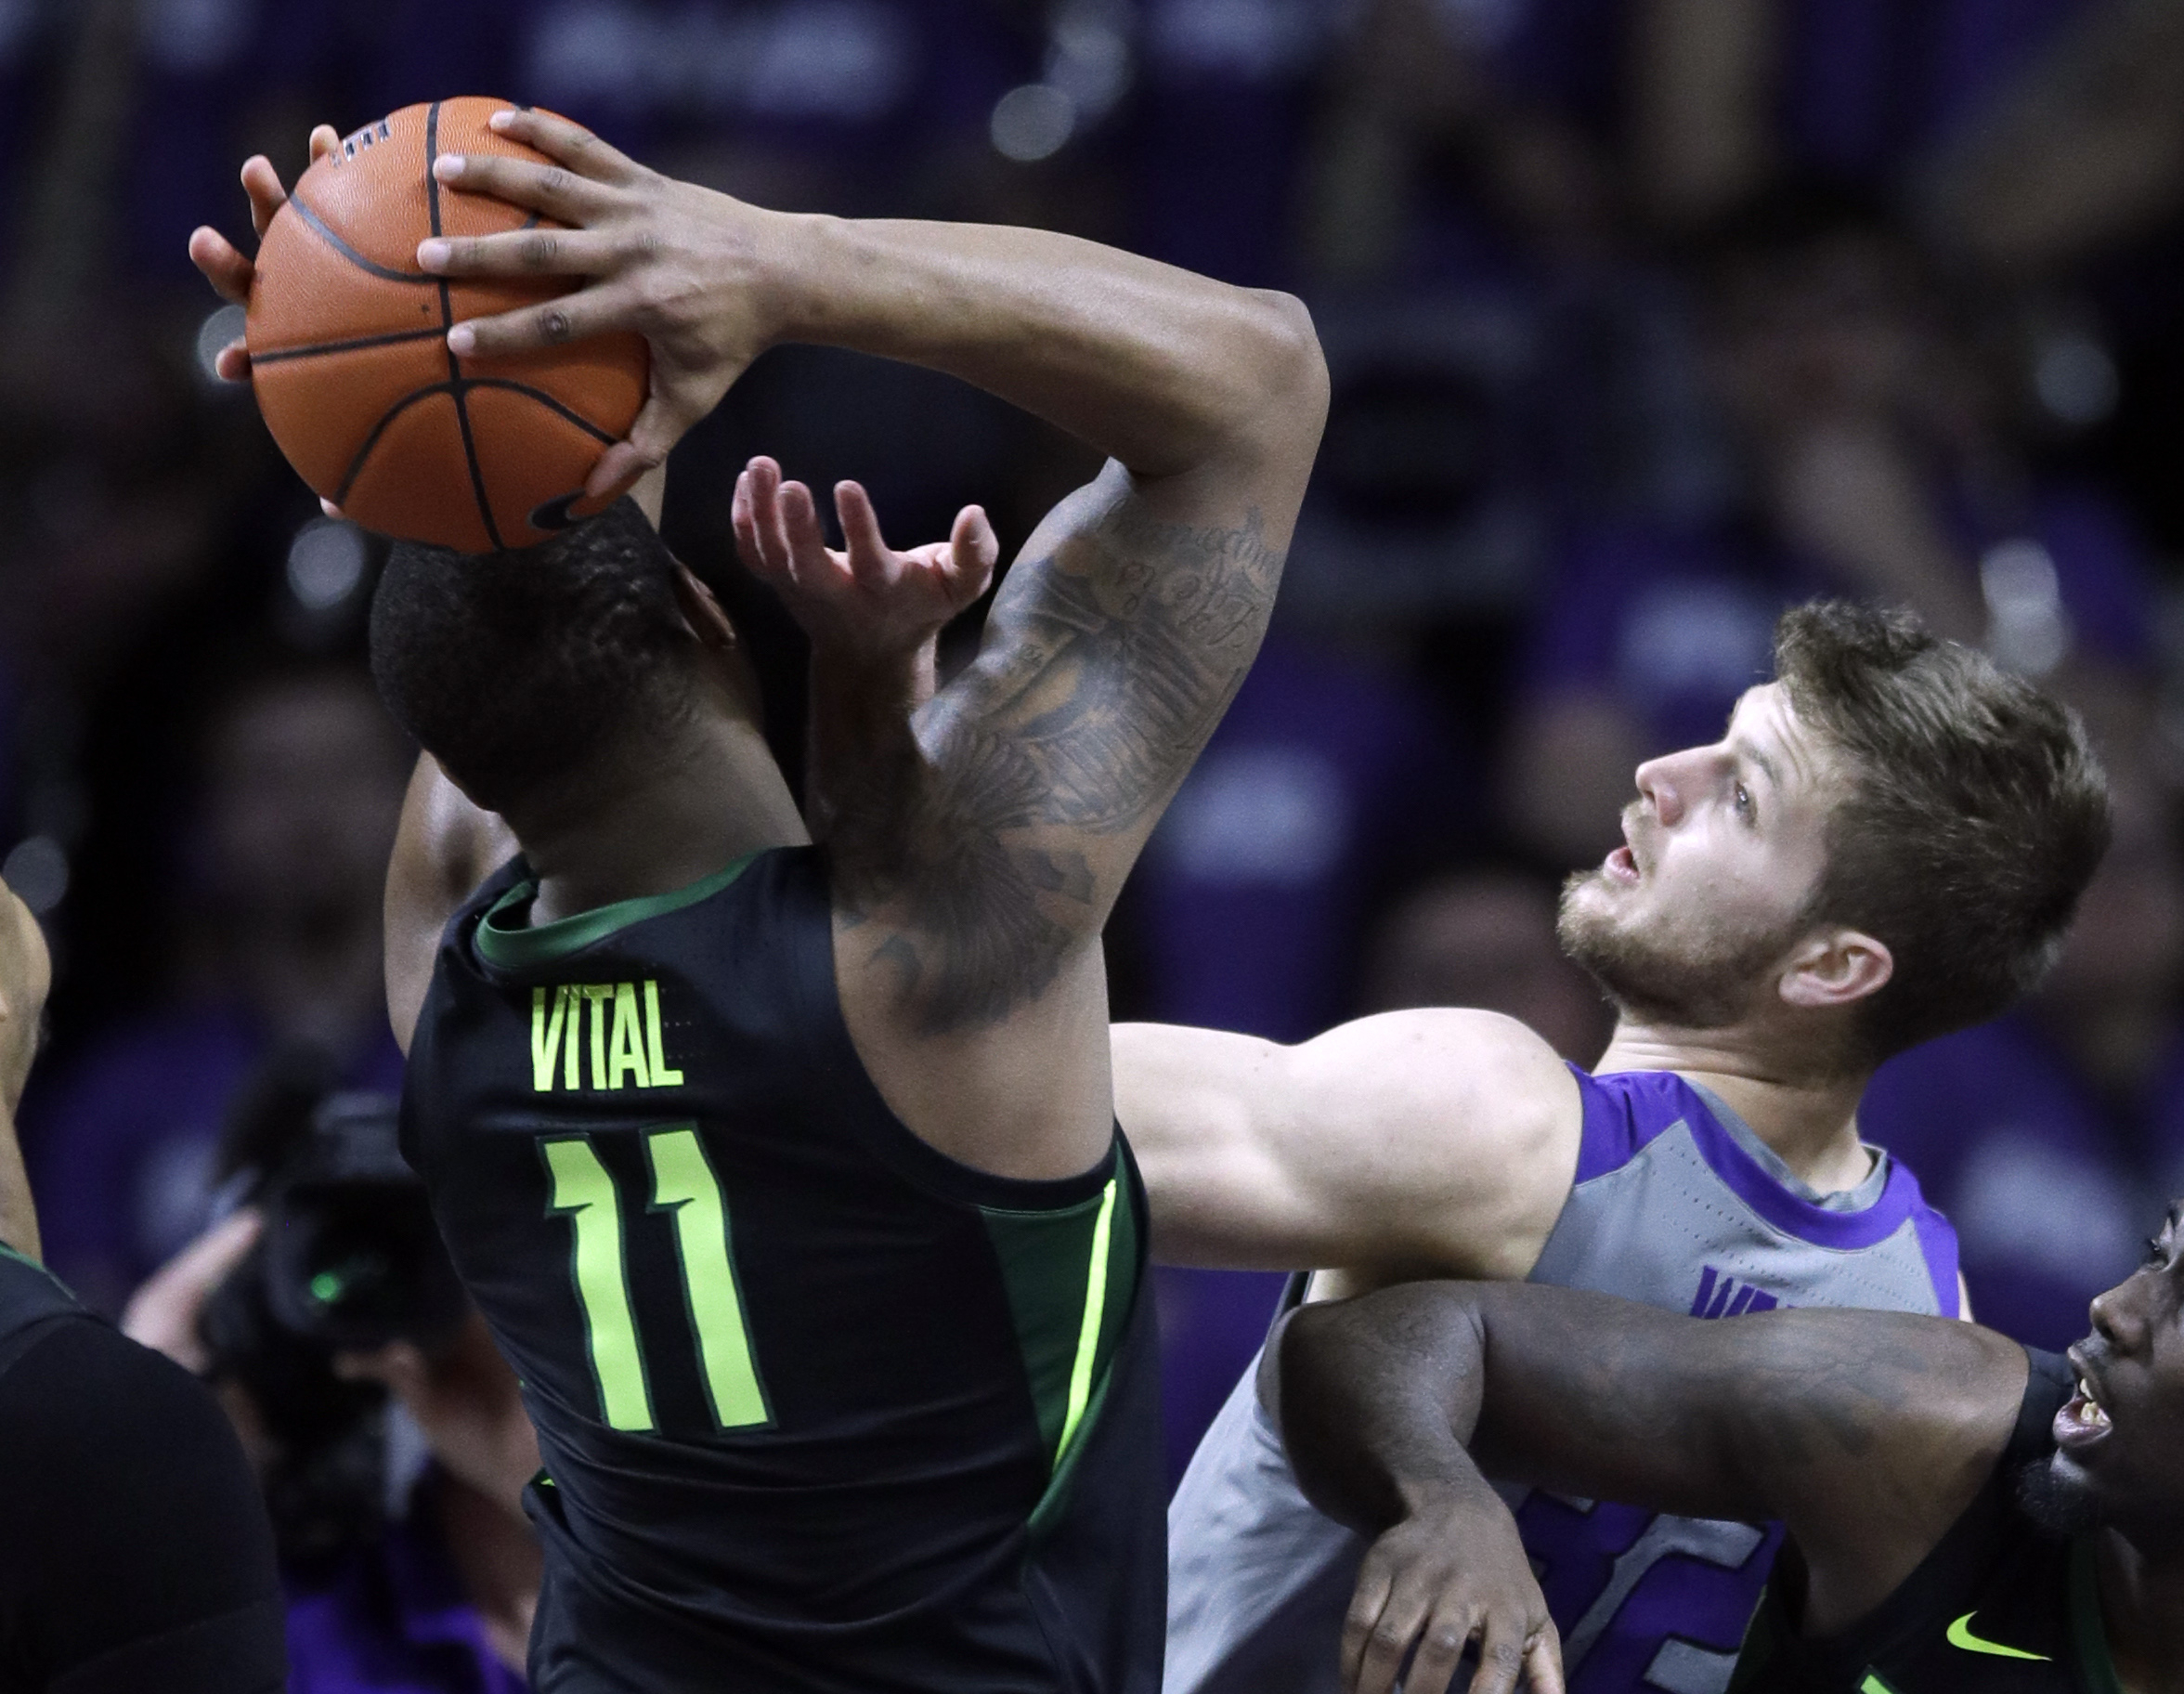 Turnovers, free throws doom Bears in road loss to K-State | The Baylor Lariat